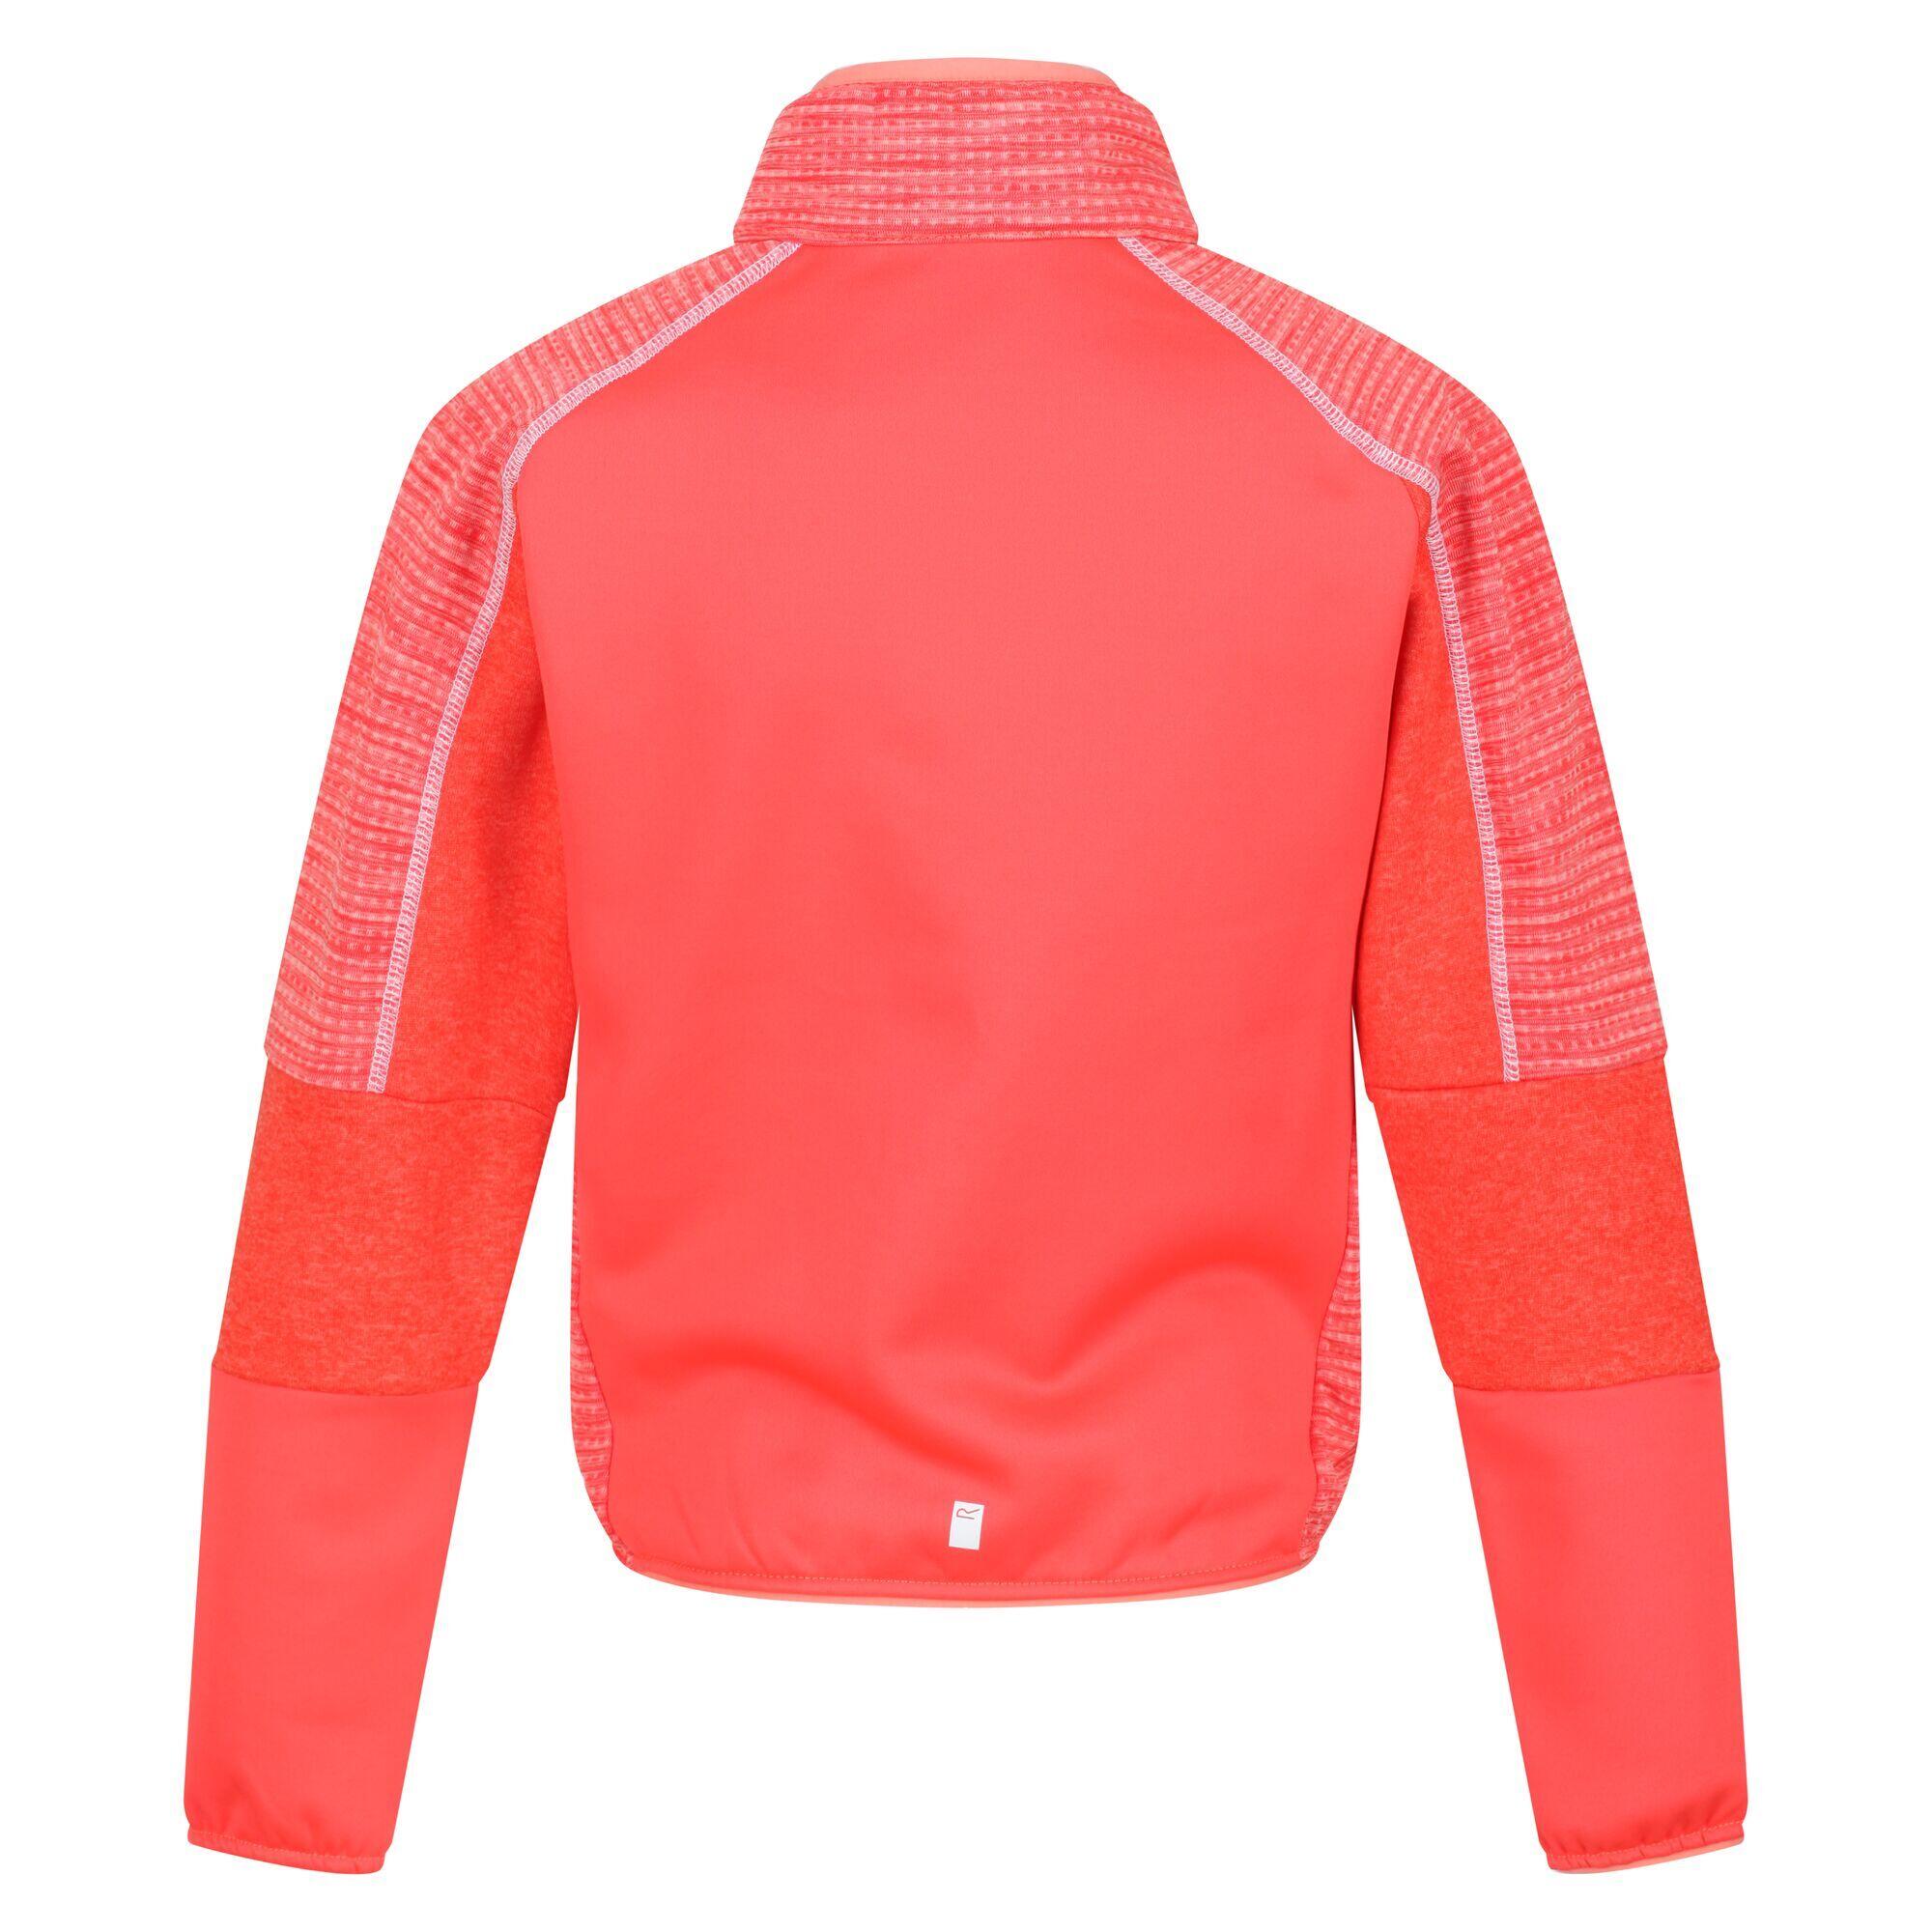 Childrens/Kids Oberon V Soft Shell Jacket (Fusion Coral/Neon Peach) 2/5